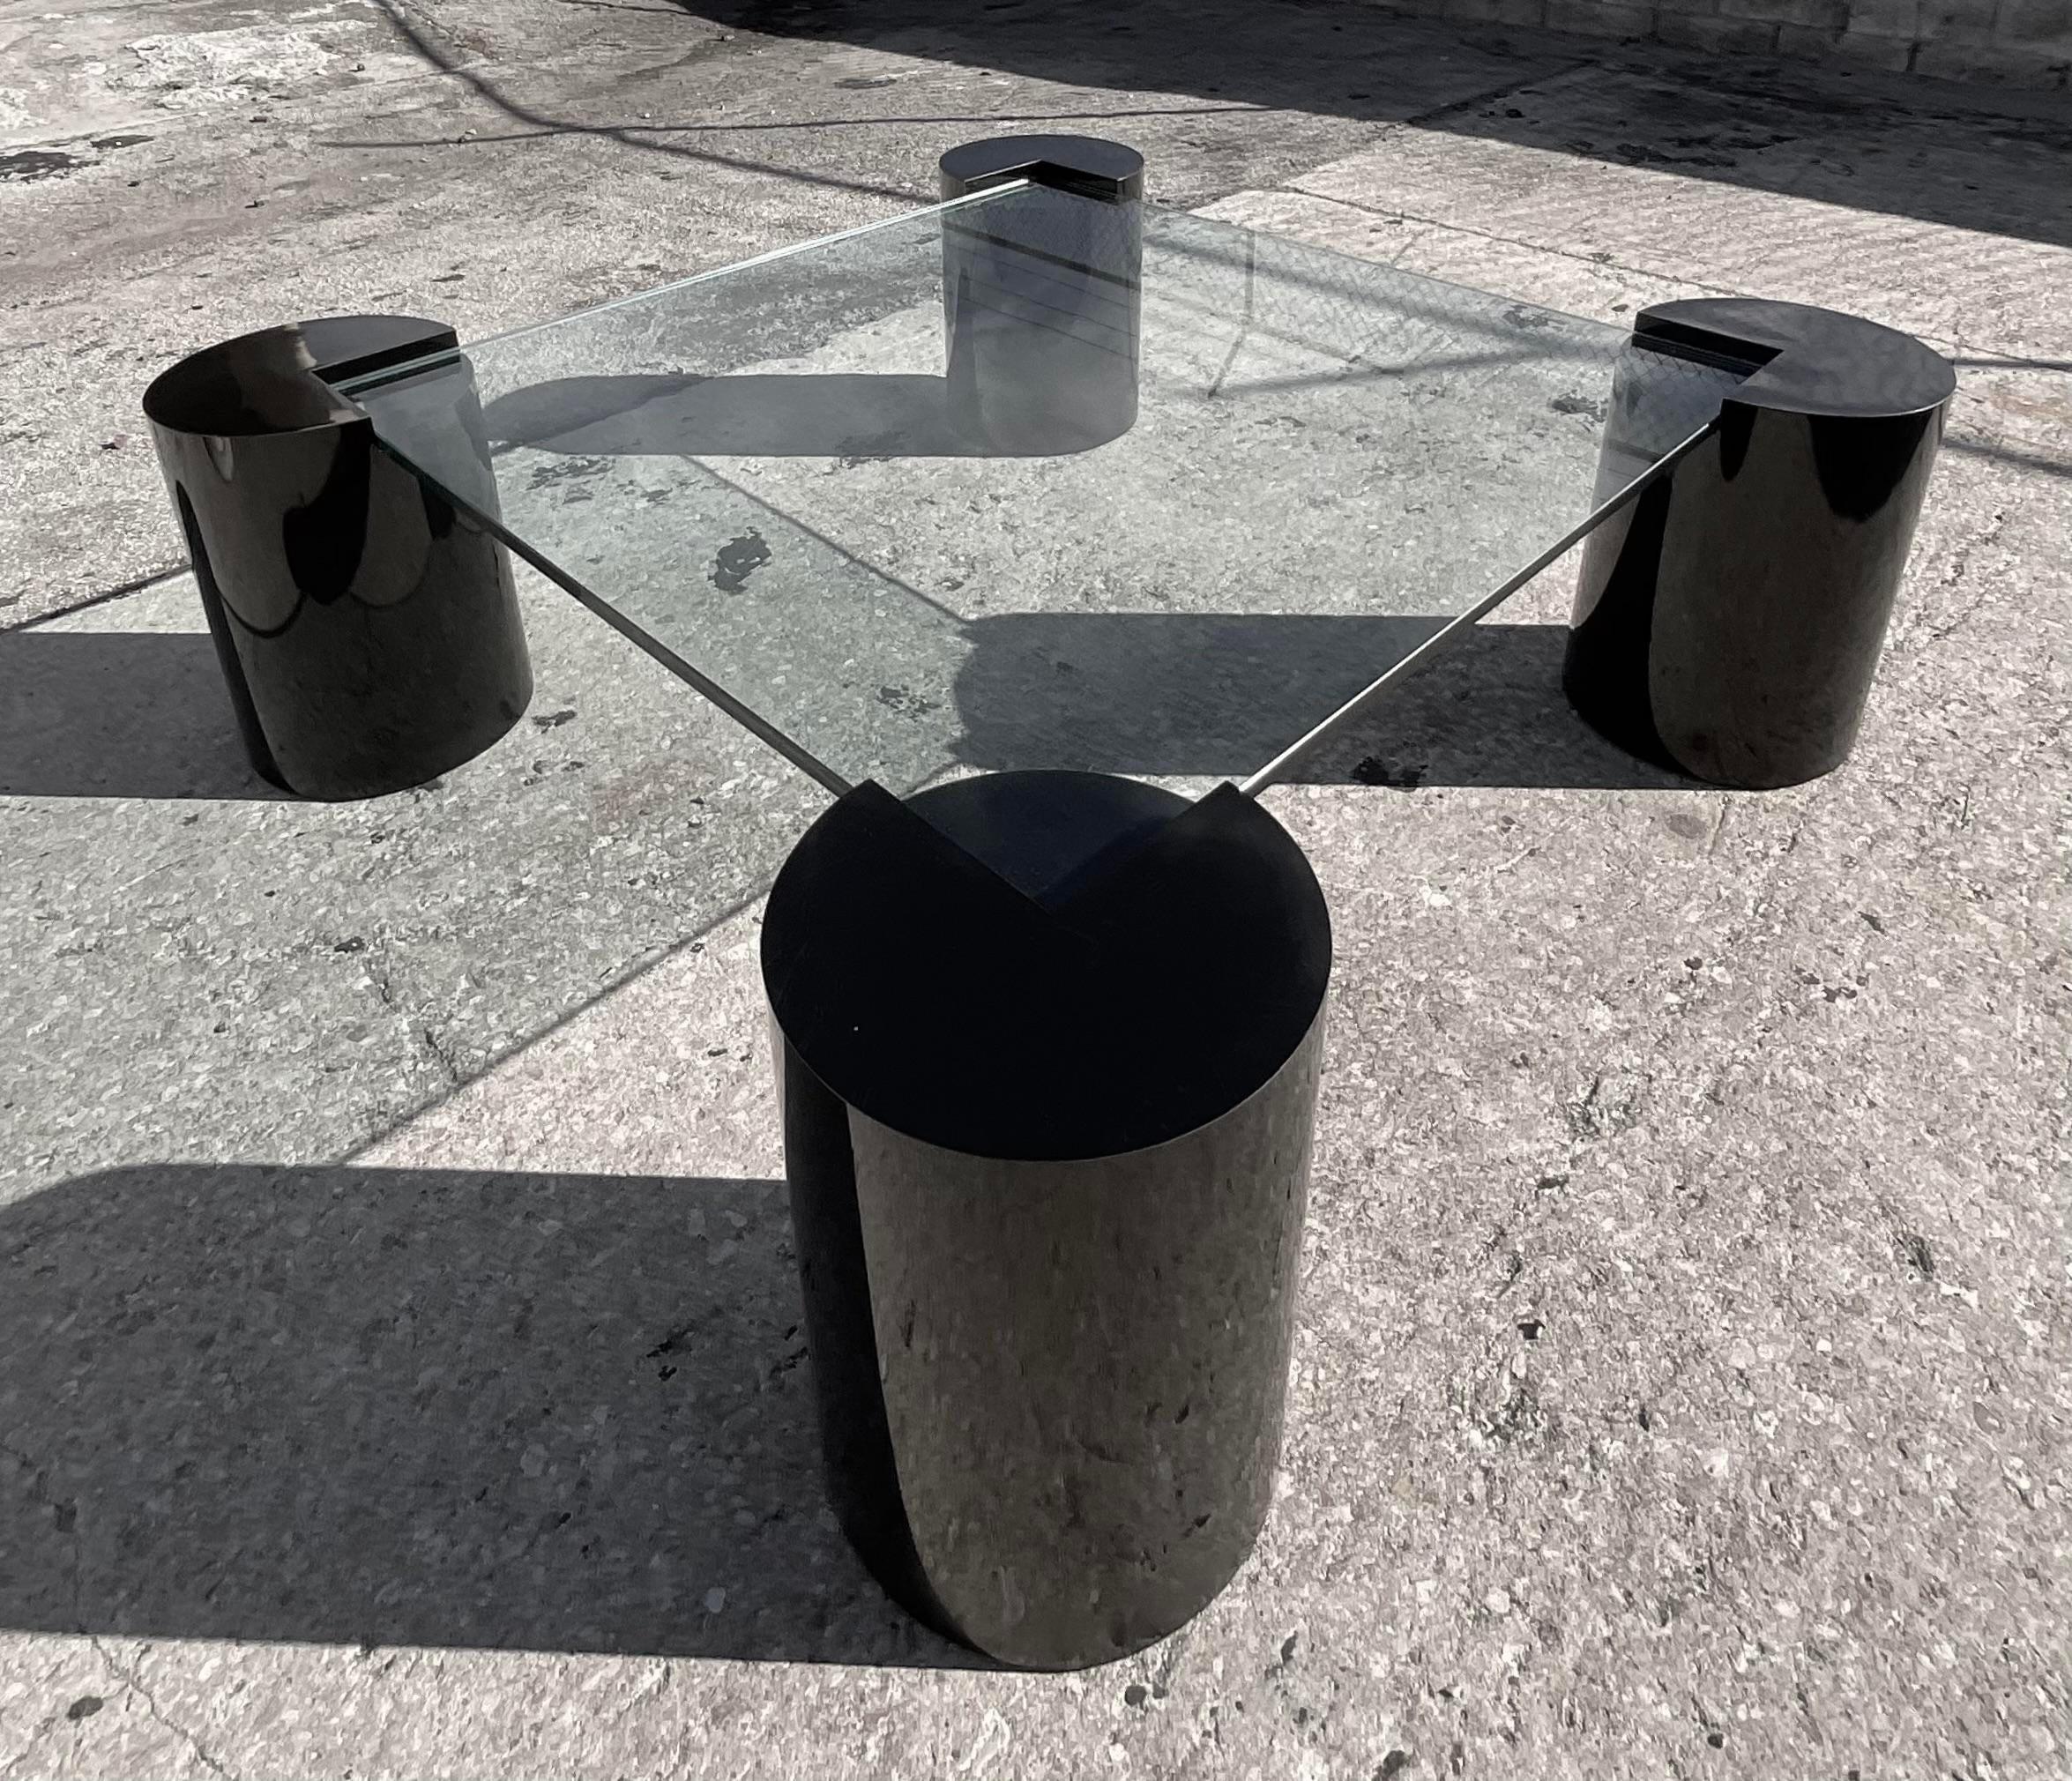 Fantastic monumental vintage 80;s coffee table. Four chic cylinder pedestals in a gloss black with an inset glass top. Super glamorous. Done in the manner of Karl Springer. Acquired from a Miami estate. 